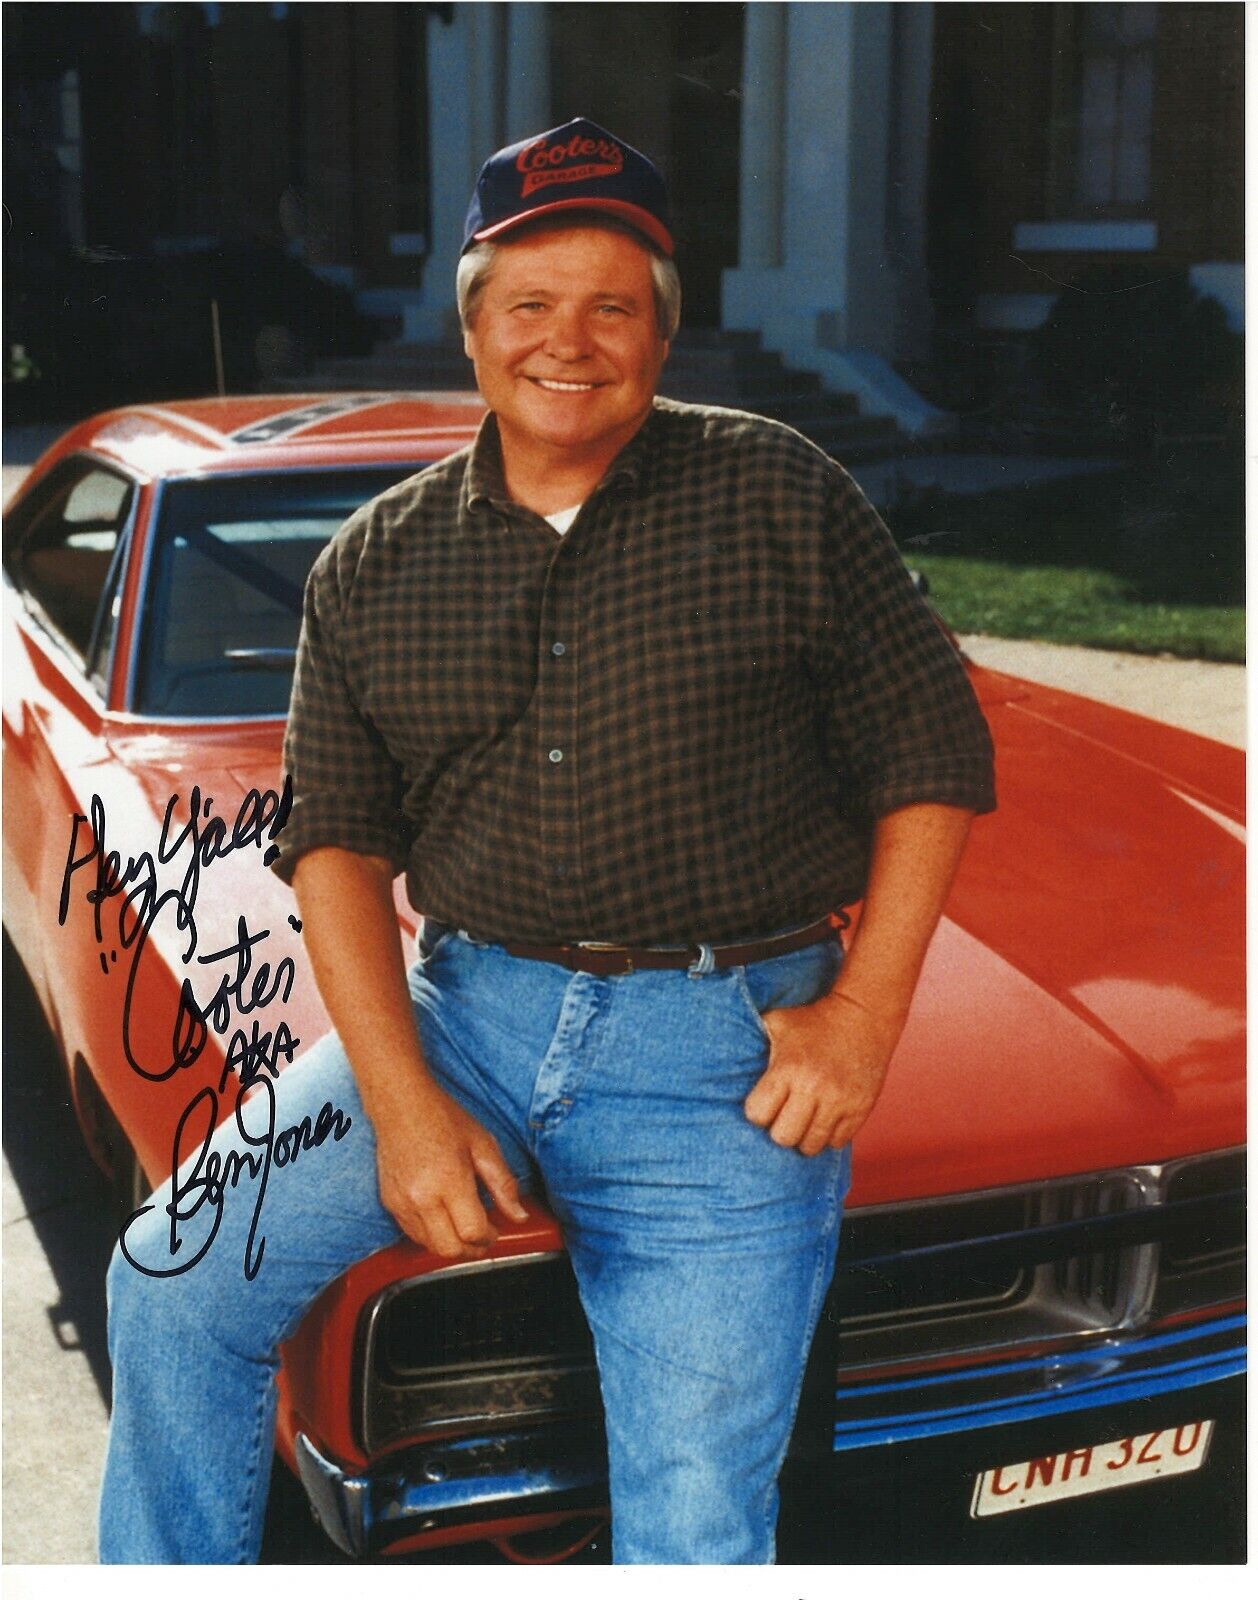 BEN JONES COOTER DUKES OF HAZZARD RARE SIGNED Photo Poster painting